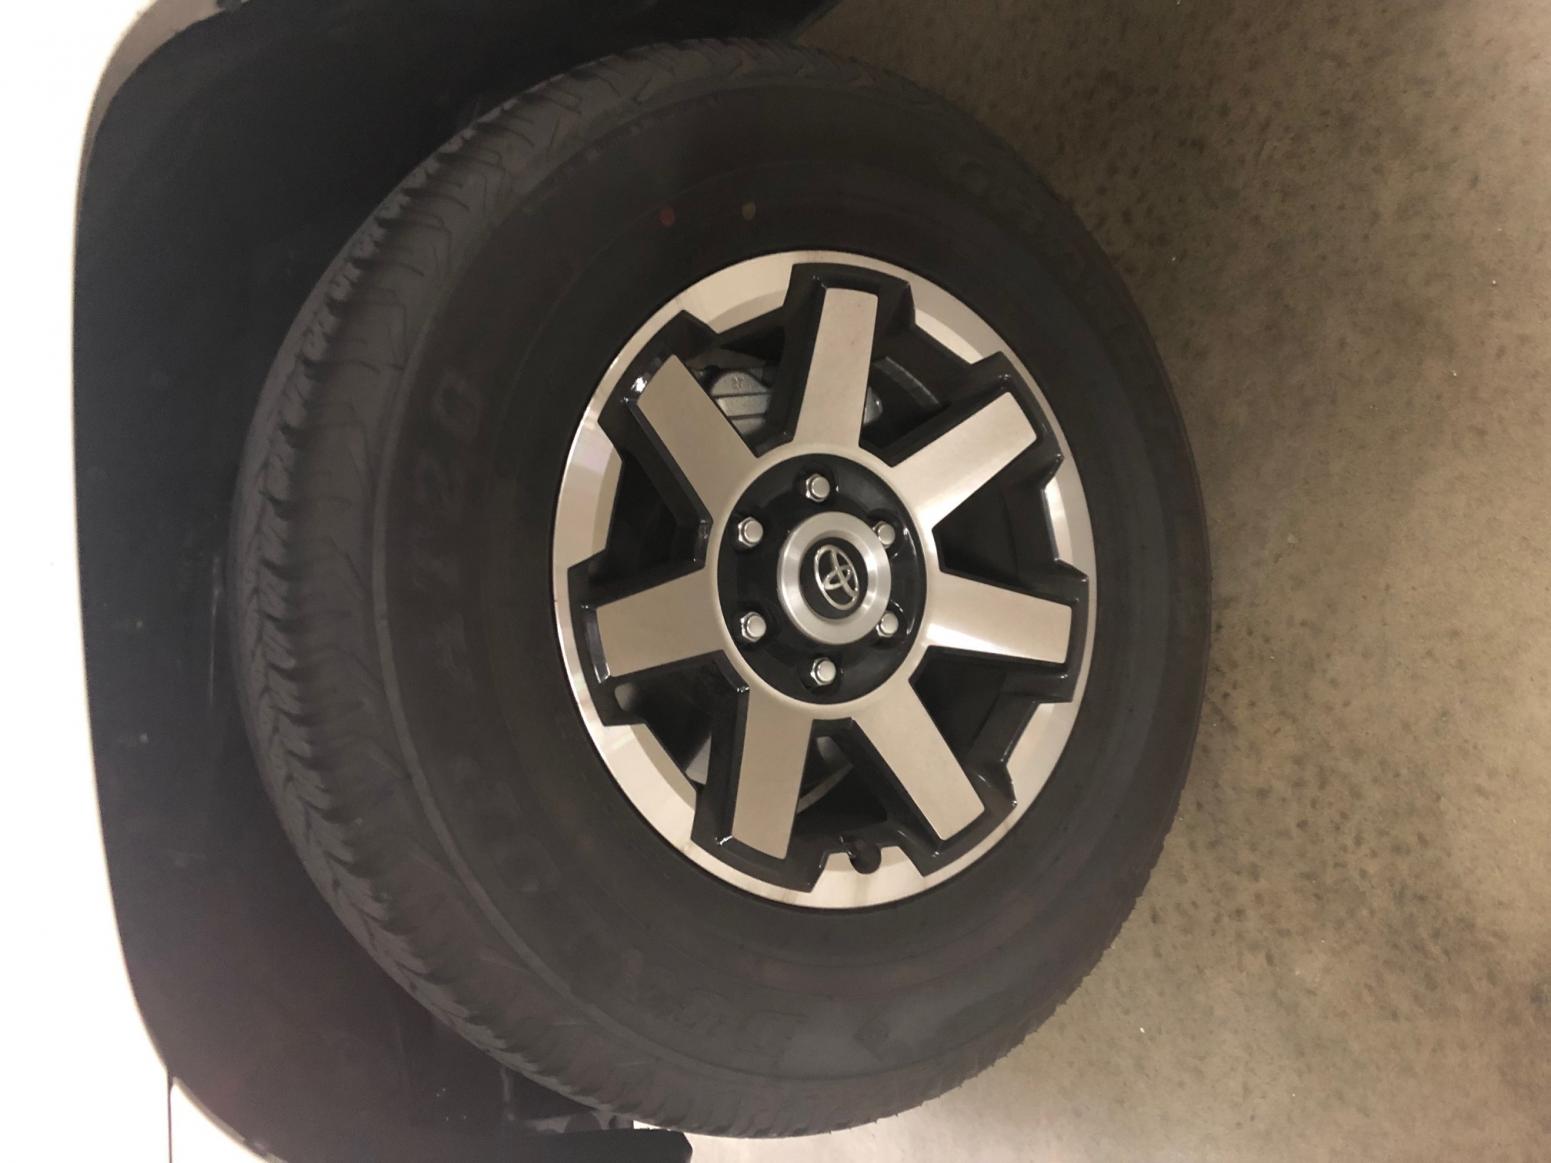 For Sale: 2019 TRD Off Road Premium Wheels and Tires - 0 (Chicago, IL)-img_1961-jpg